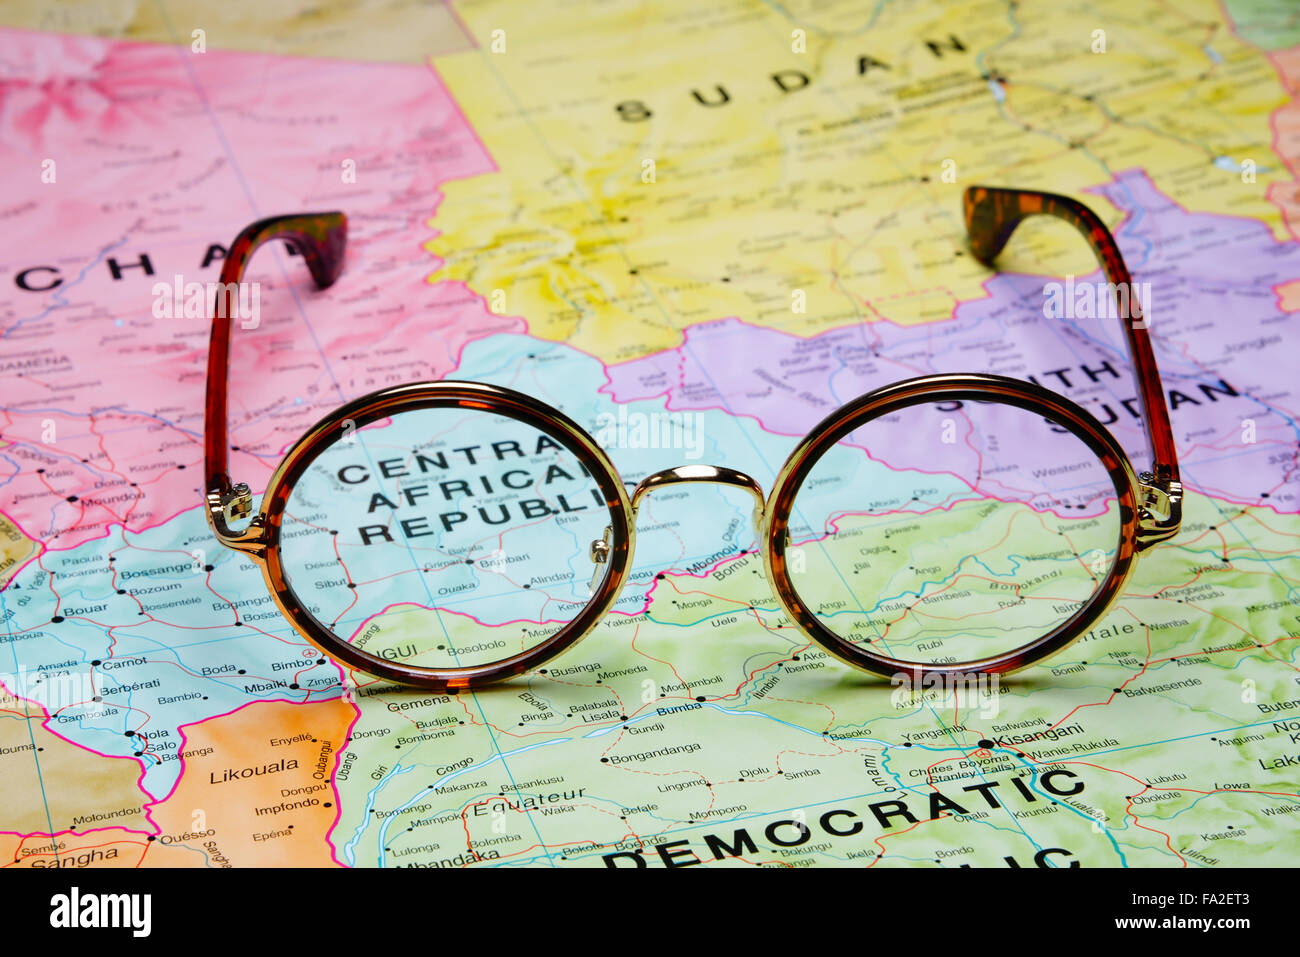 Glasses on a map - Central African Republic Stock Photo